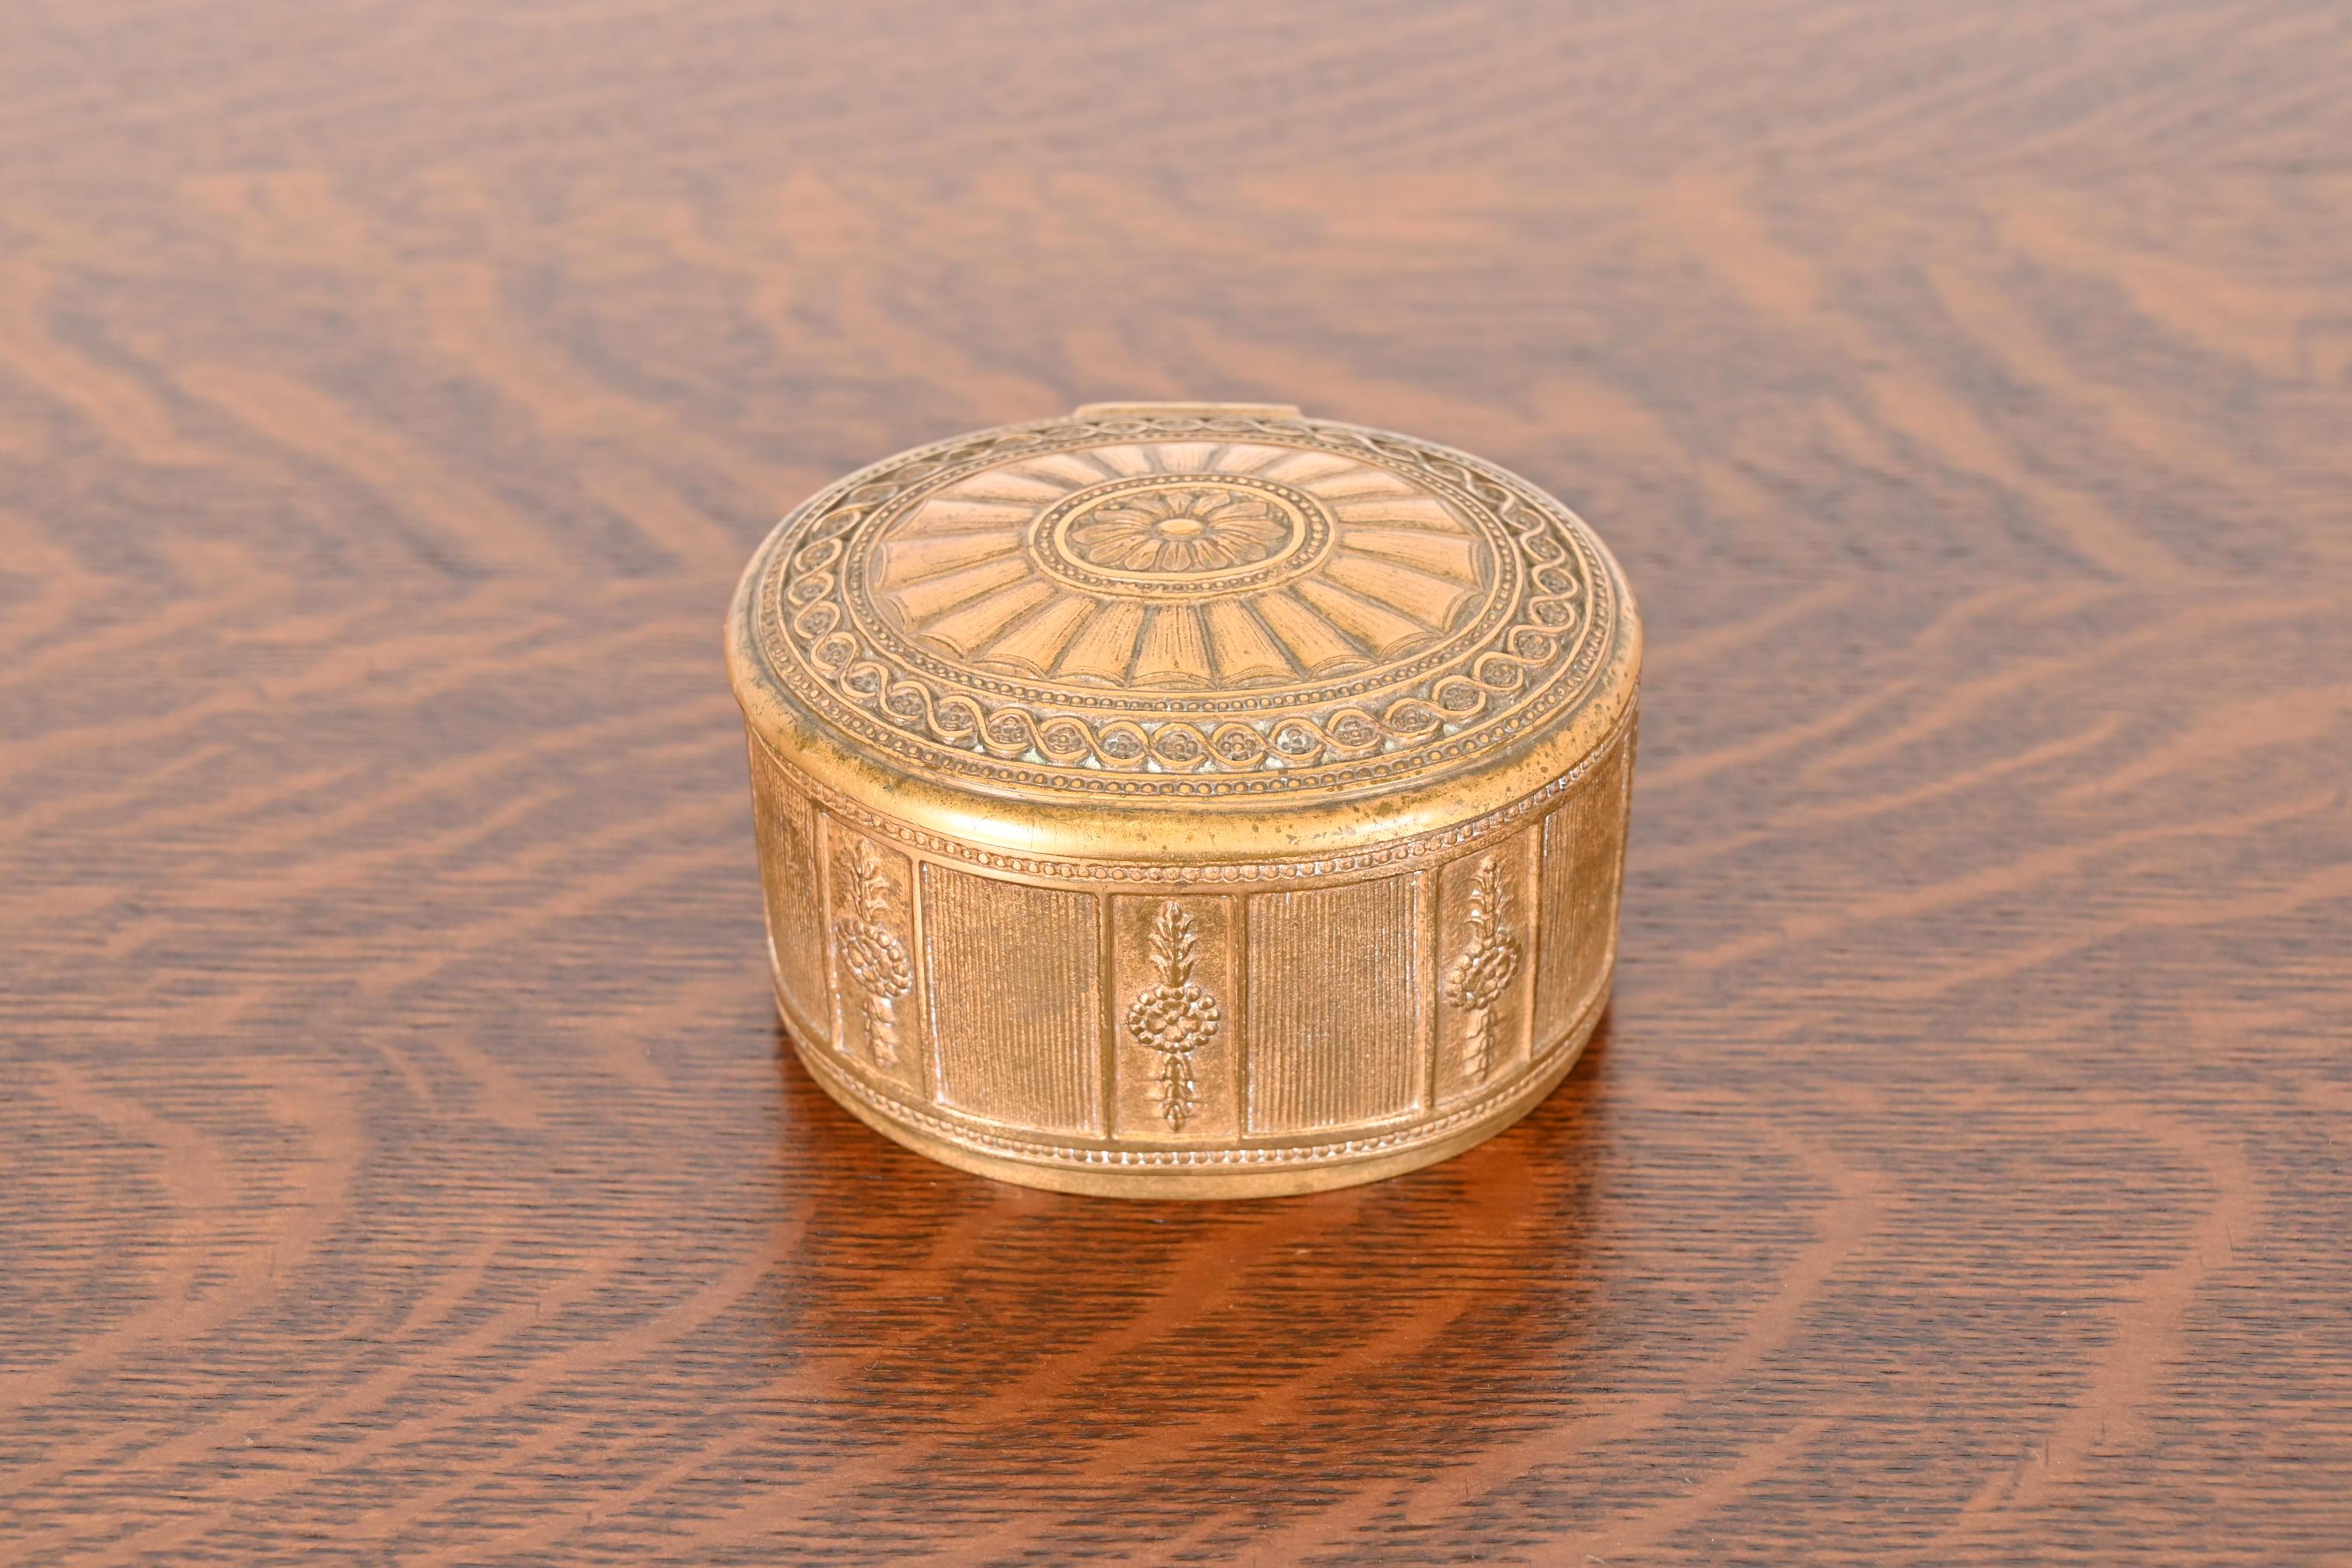 A gorgeous antique gilt bronze Neoclassical or Adam style inkwell

By Tiffany Studios (signed to the underside)

New York, USA, Early 20th Century

Measures: 4.25